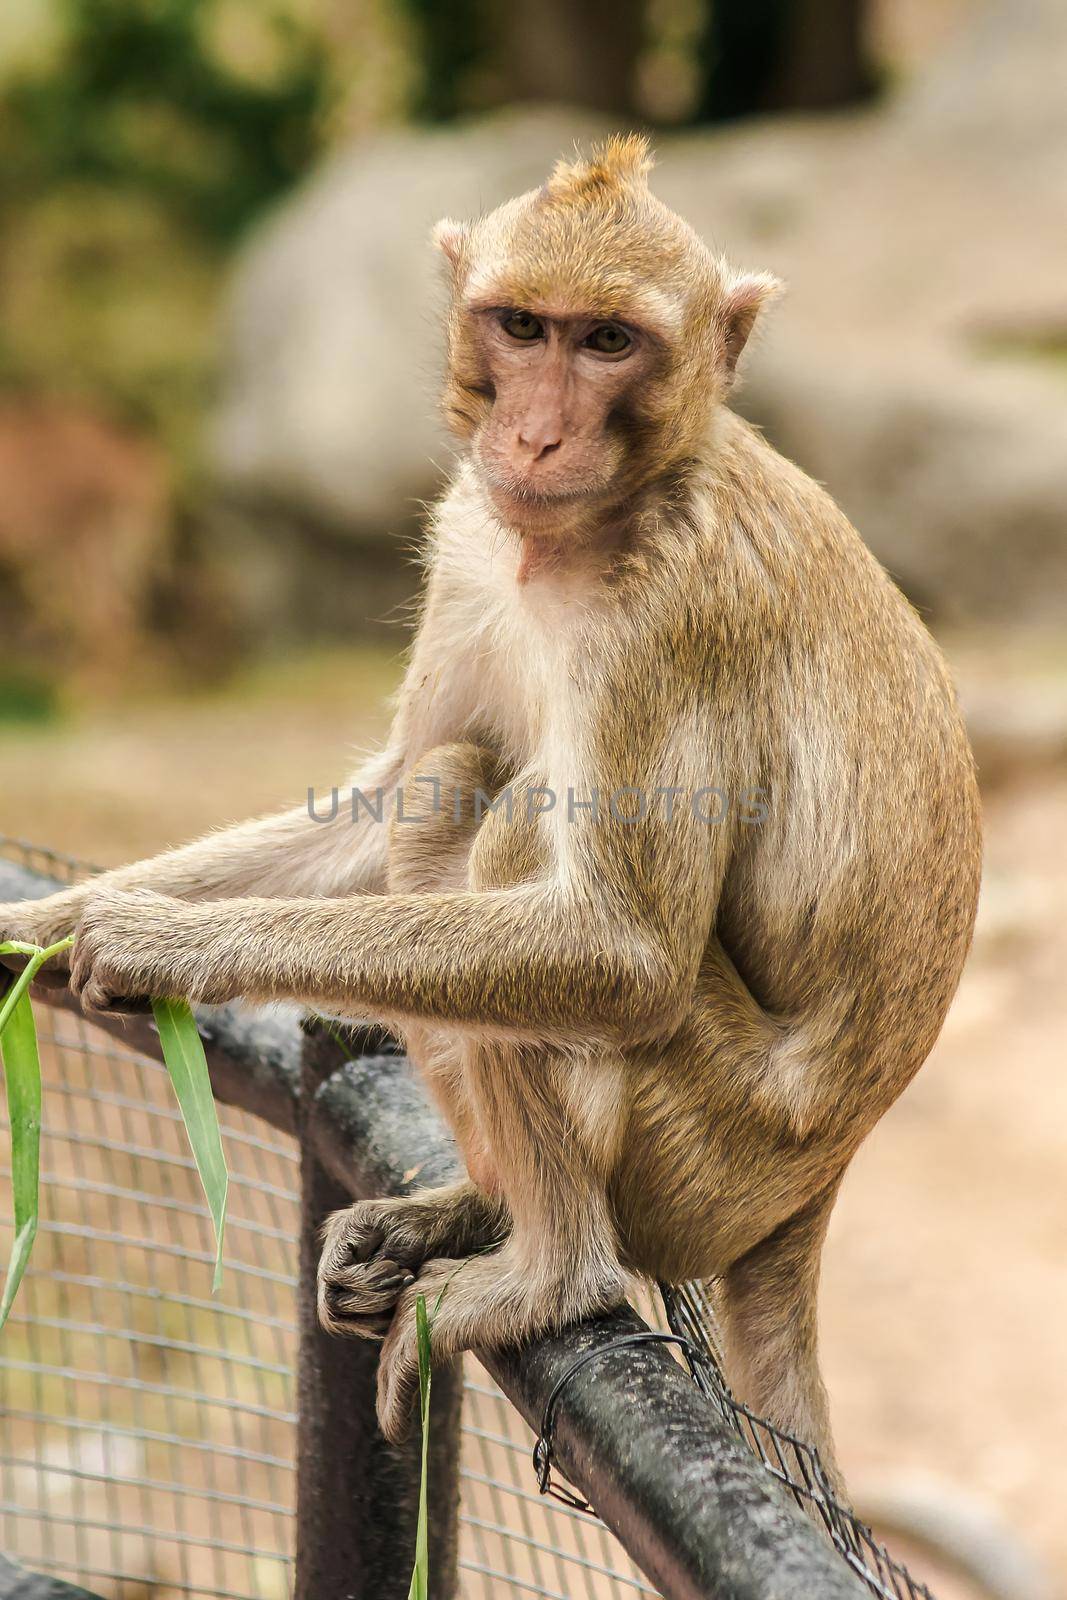 Crab-eating Macaque sat on the fence, eating the grass.
The macaque has brown hair on its body. The tail is longer than the length of the body. The hair in the middle of the head is pointed upright.